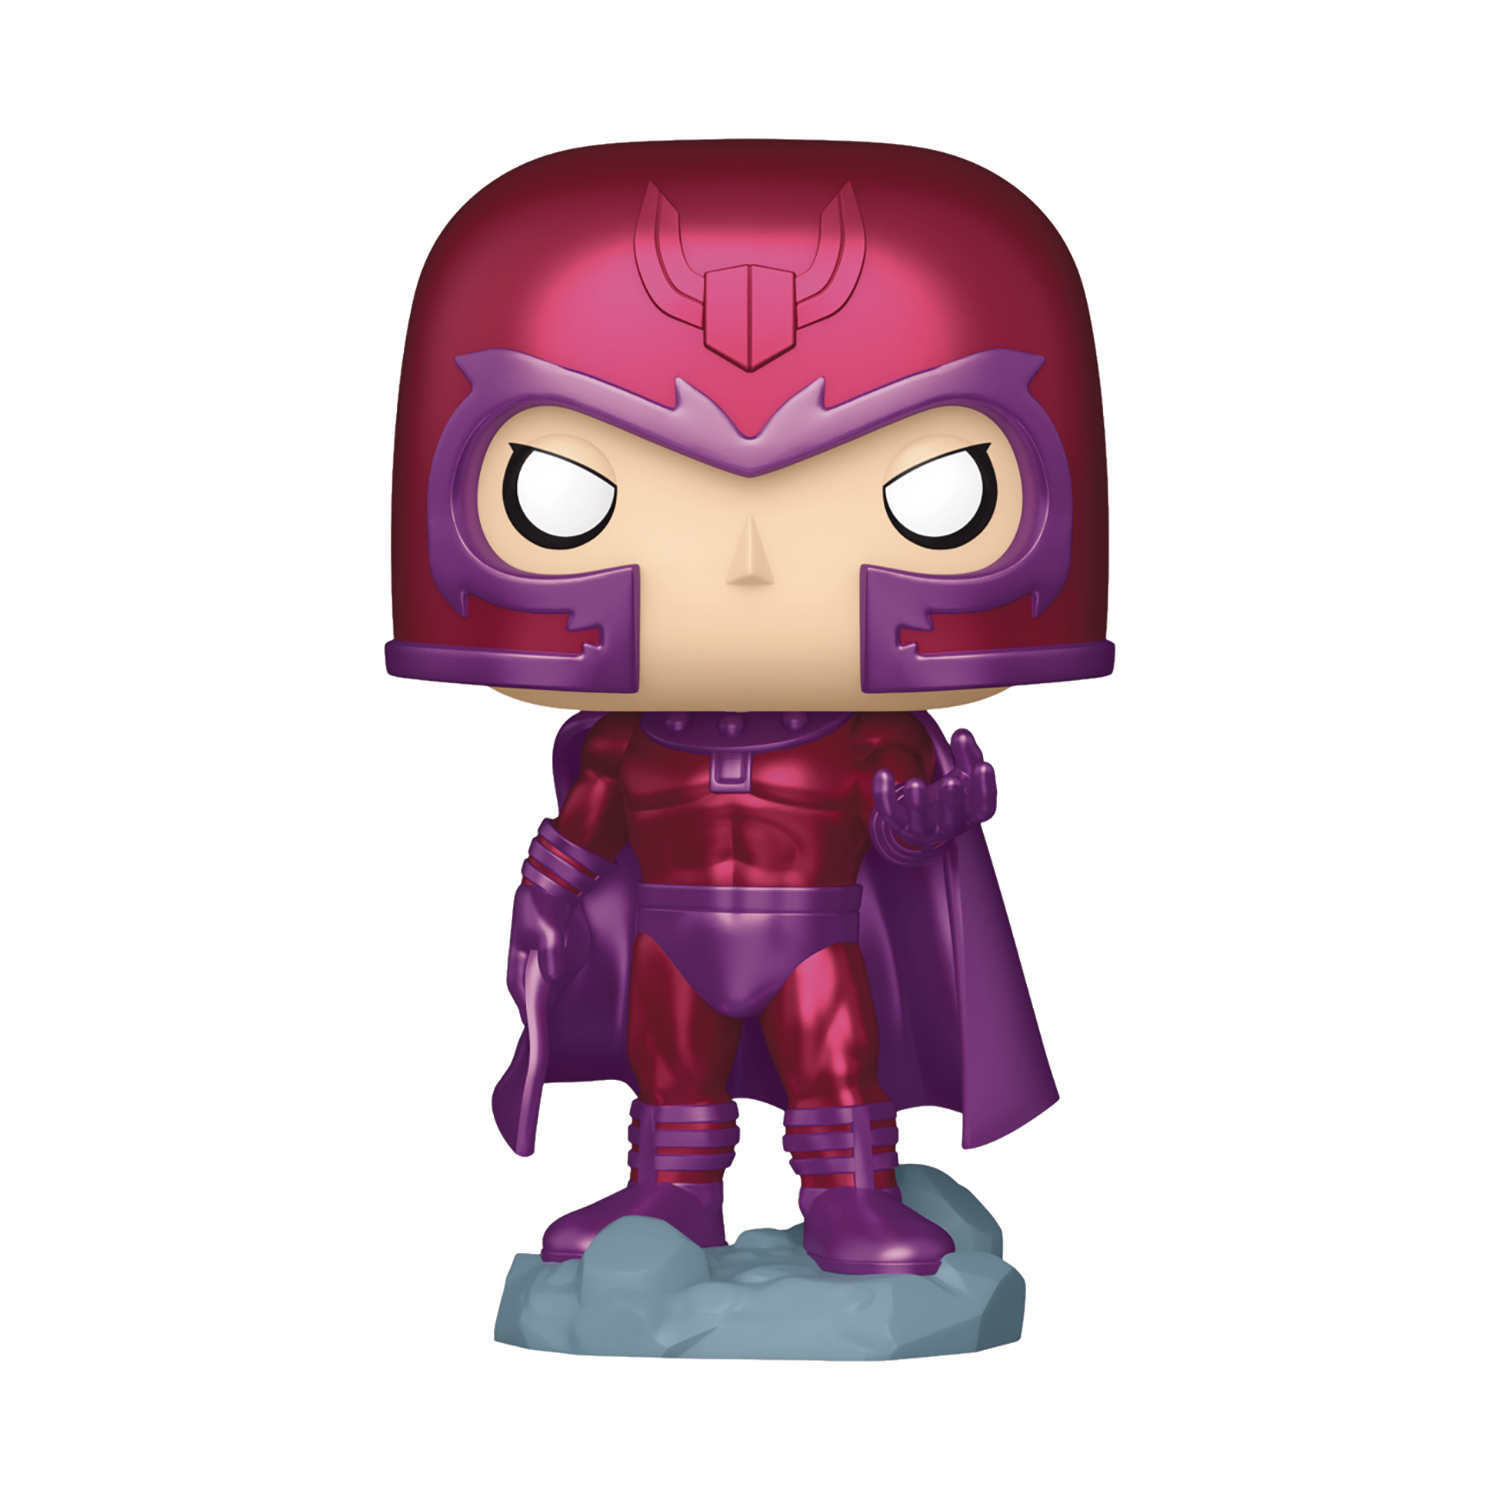 PX Magneto Pop Out of Box